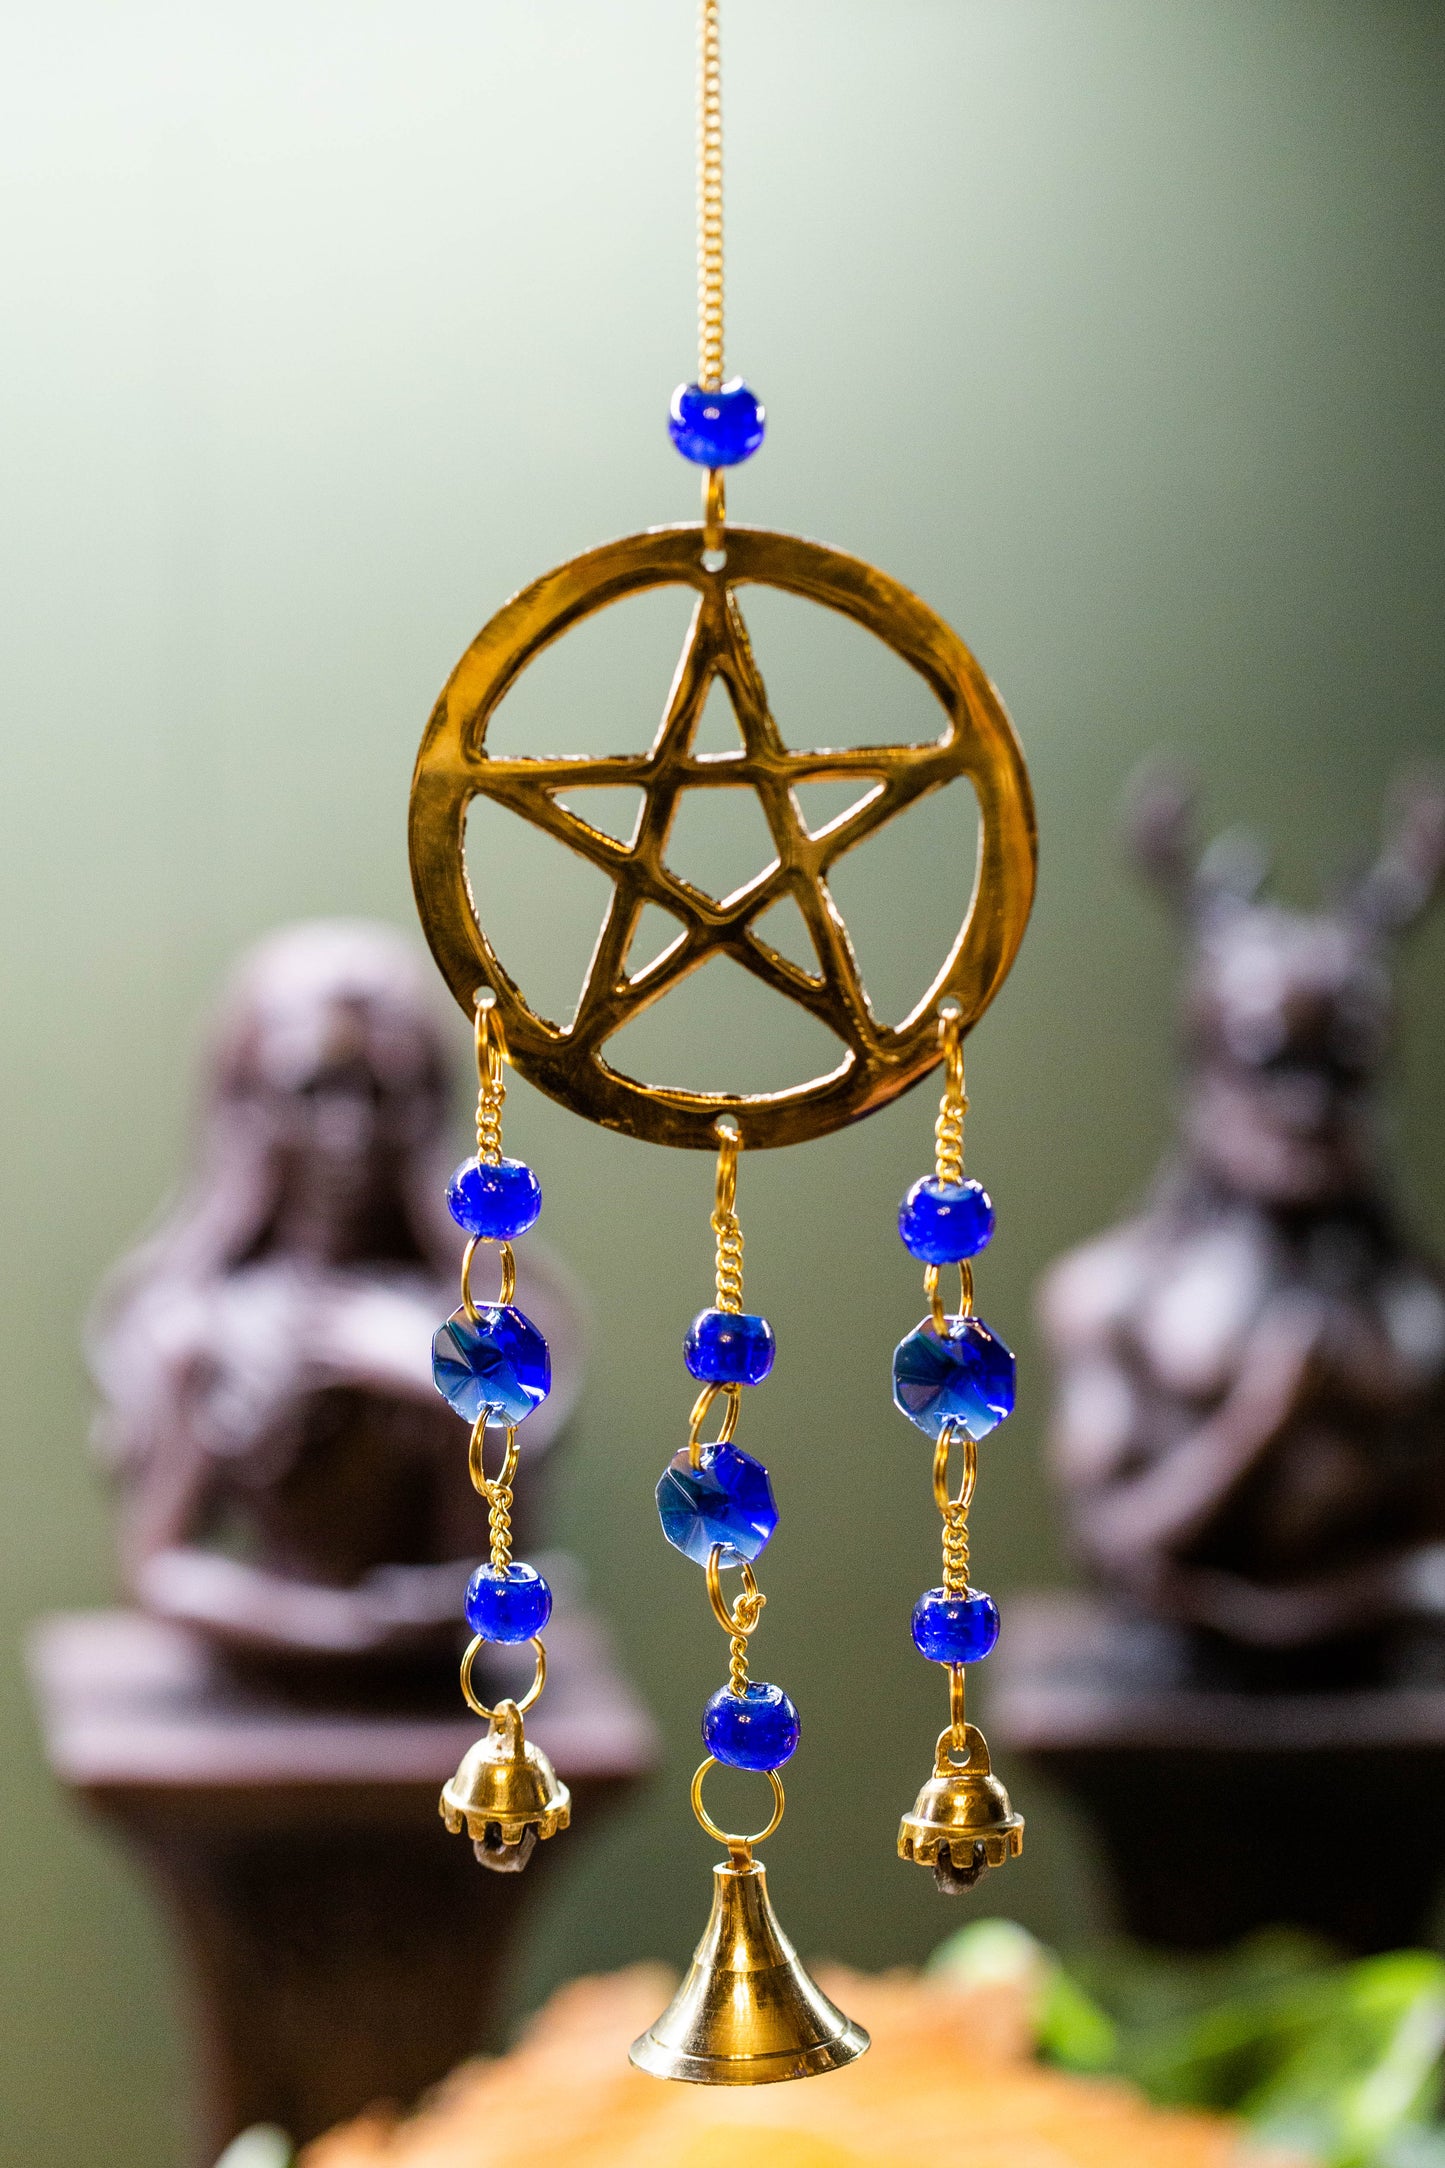 Pentacle Wind Chime for Protection and Success